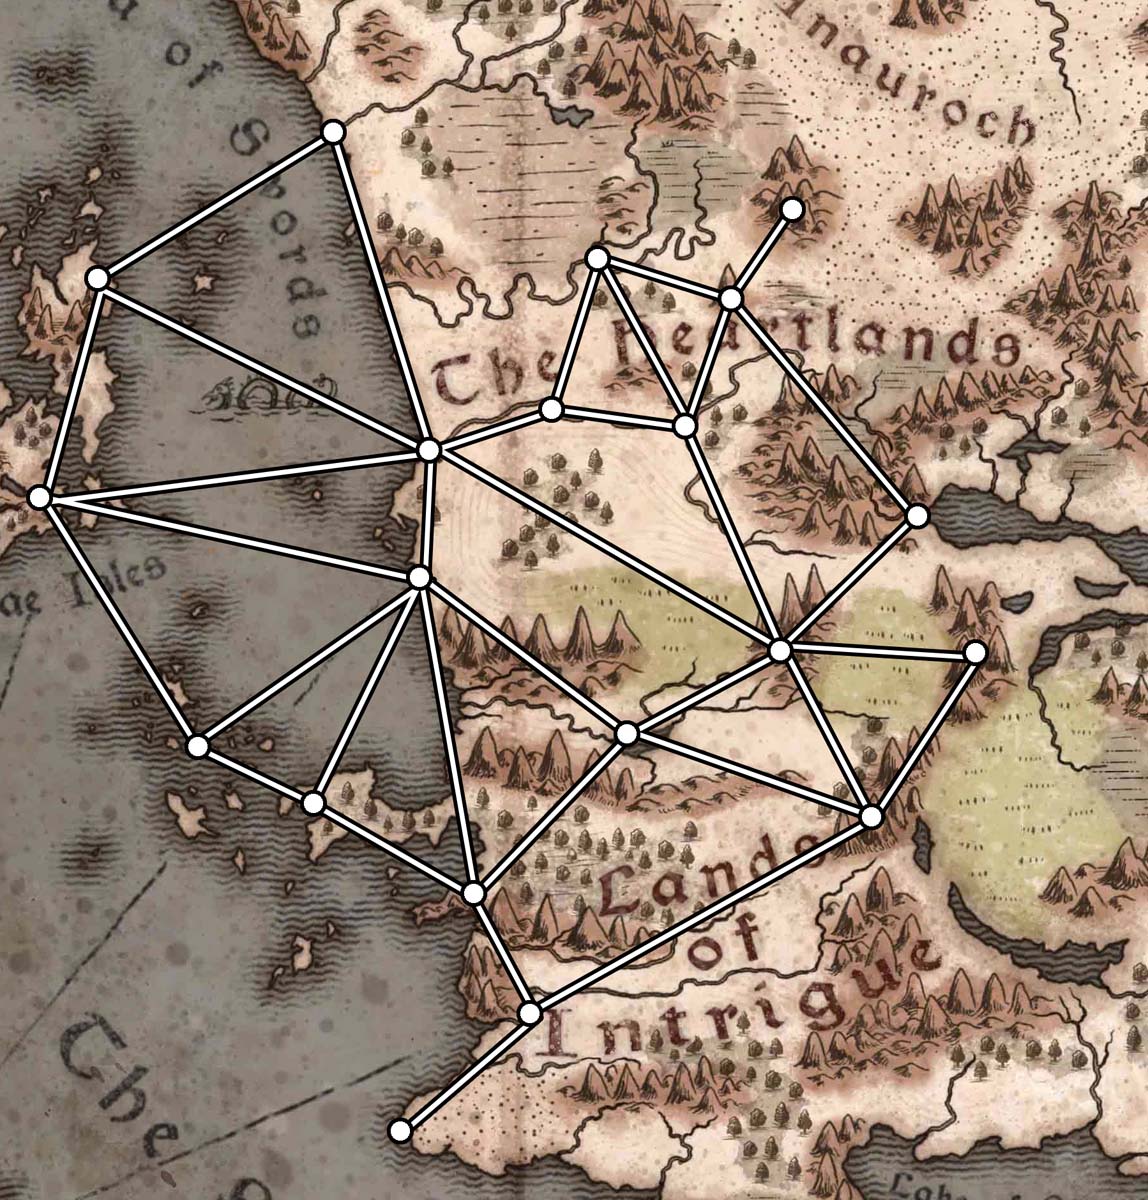 A continental map with white nodes scattered across various landmarks. Straight white lines connect the nodes.